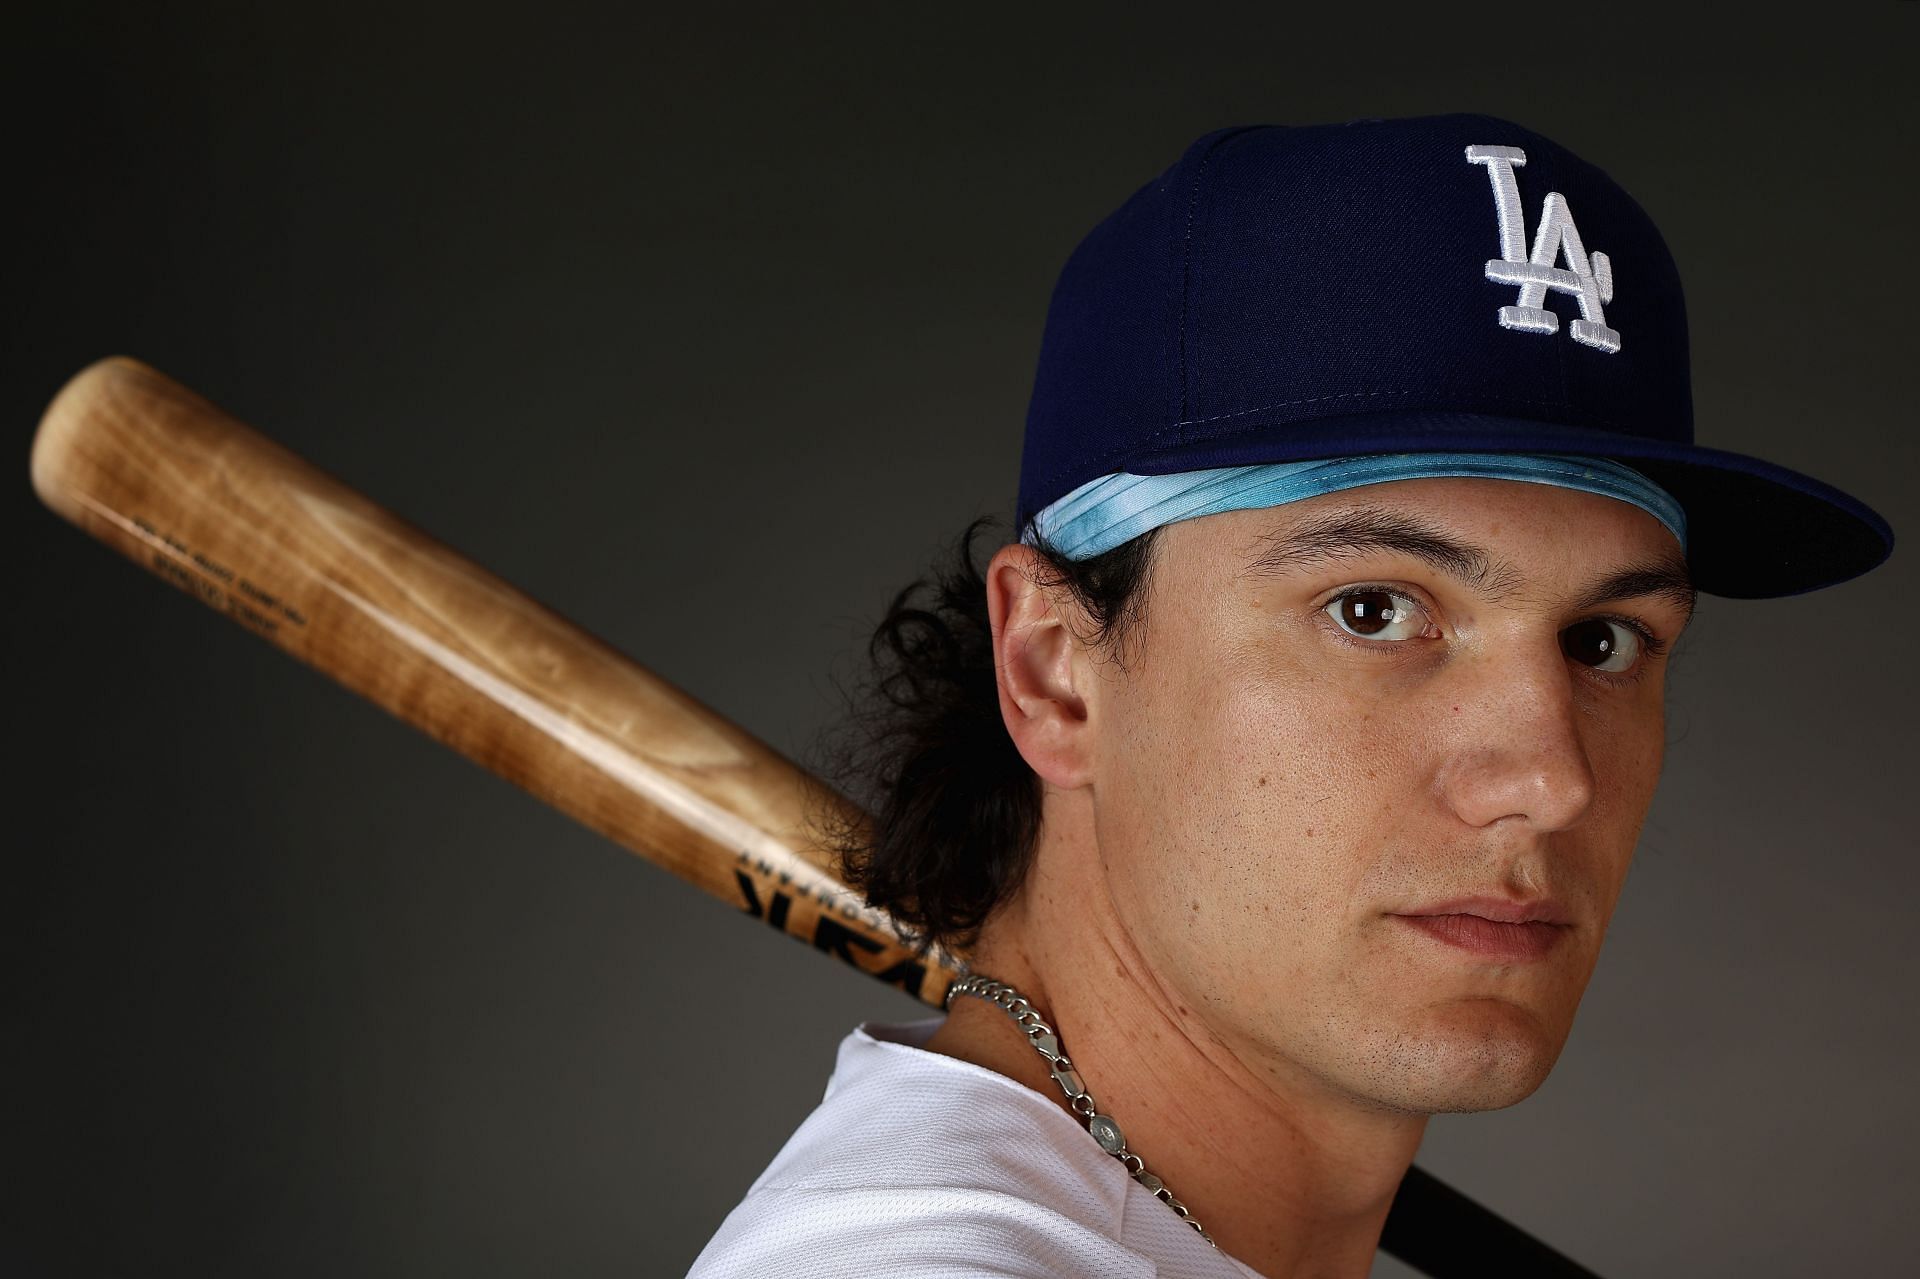 James Outman Los Angeles Dodgers: Who is James Outman? All about the new  Dodgers Center Fielder after Opening Day heroics